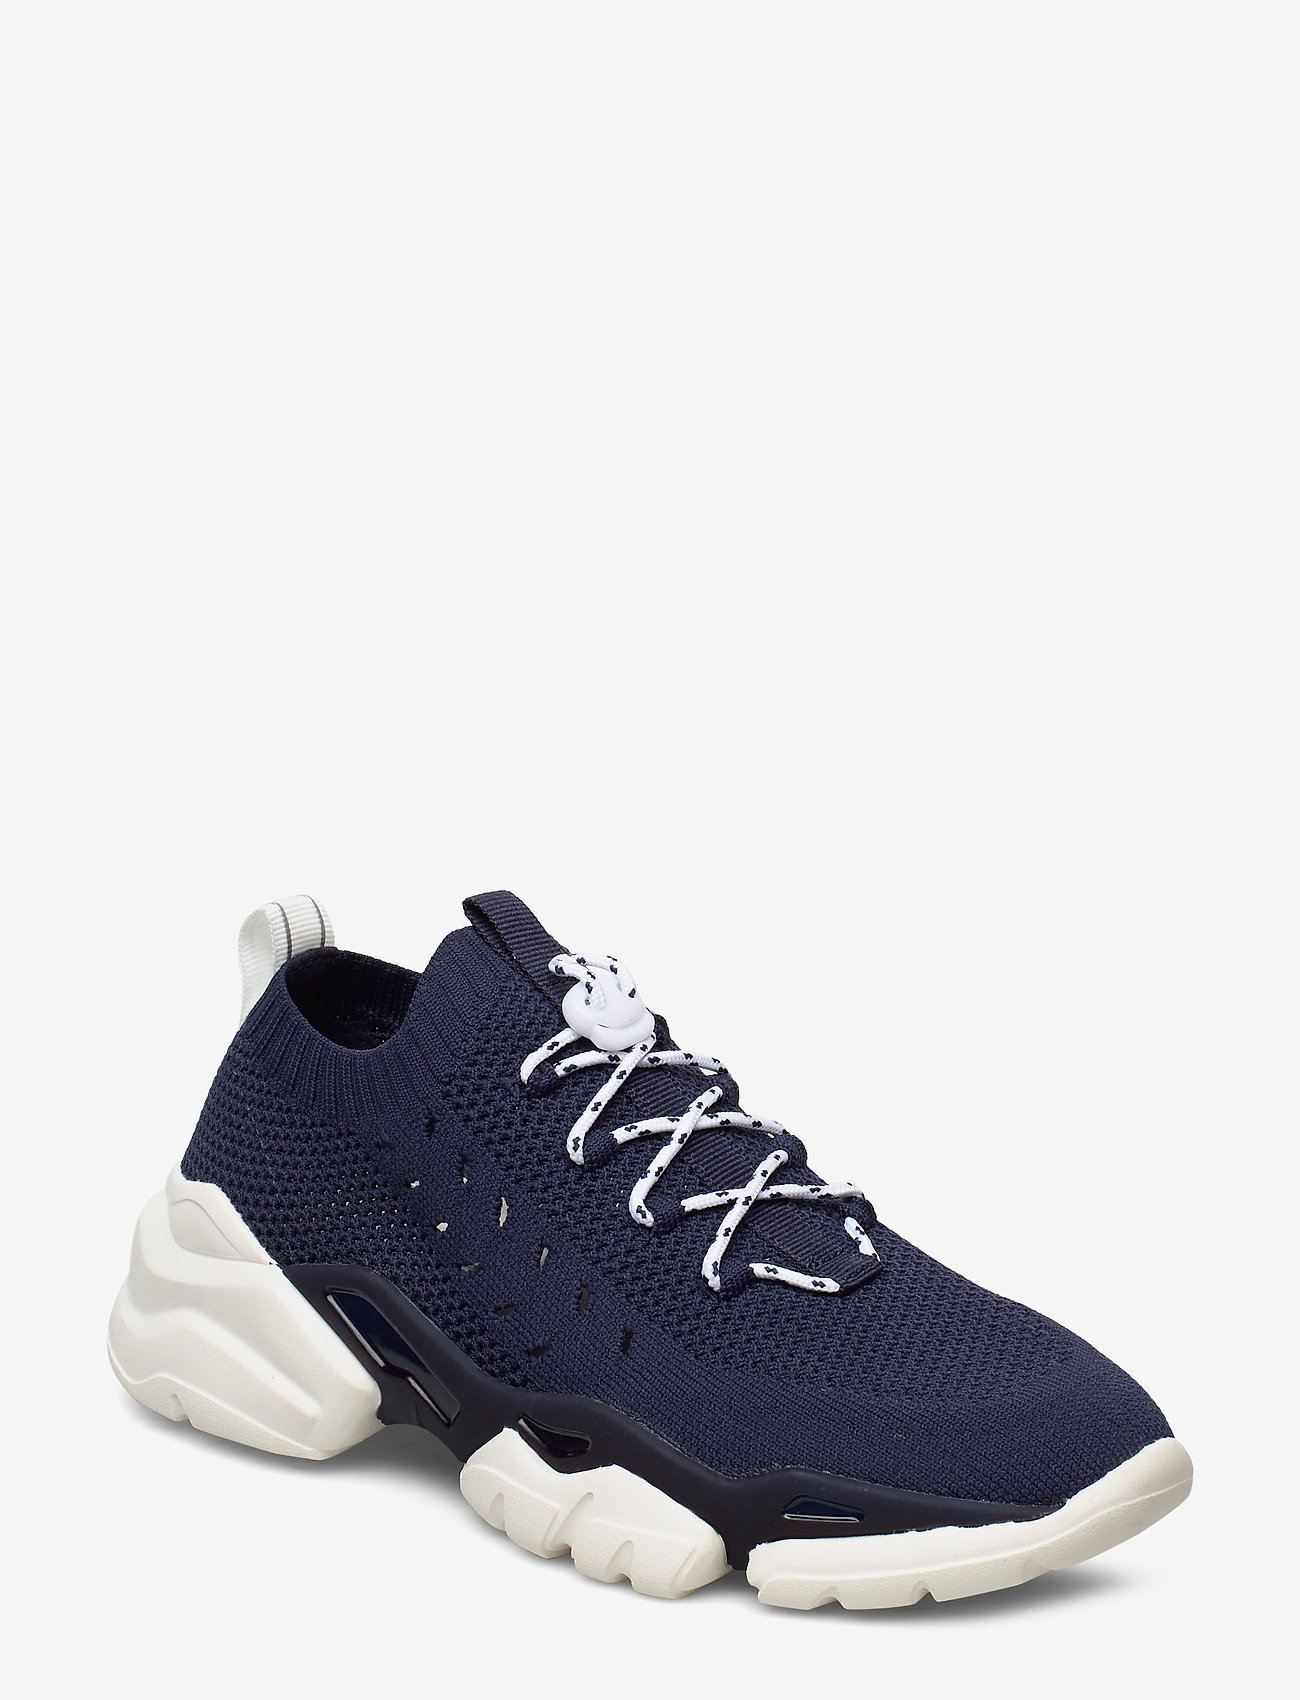 navy polo shoes